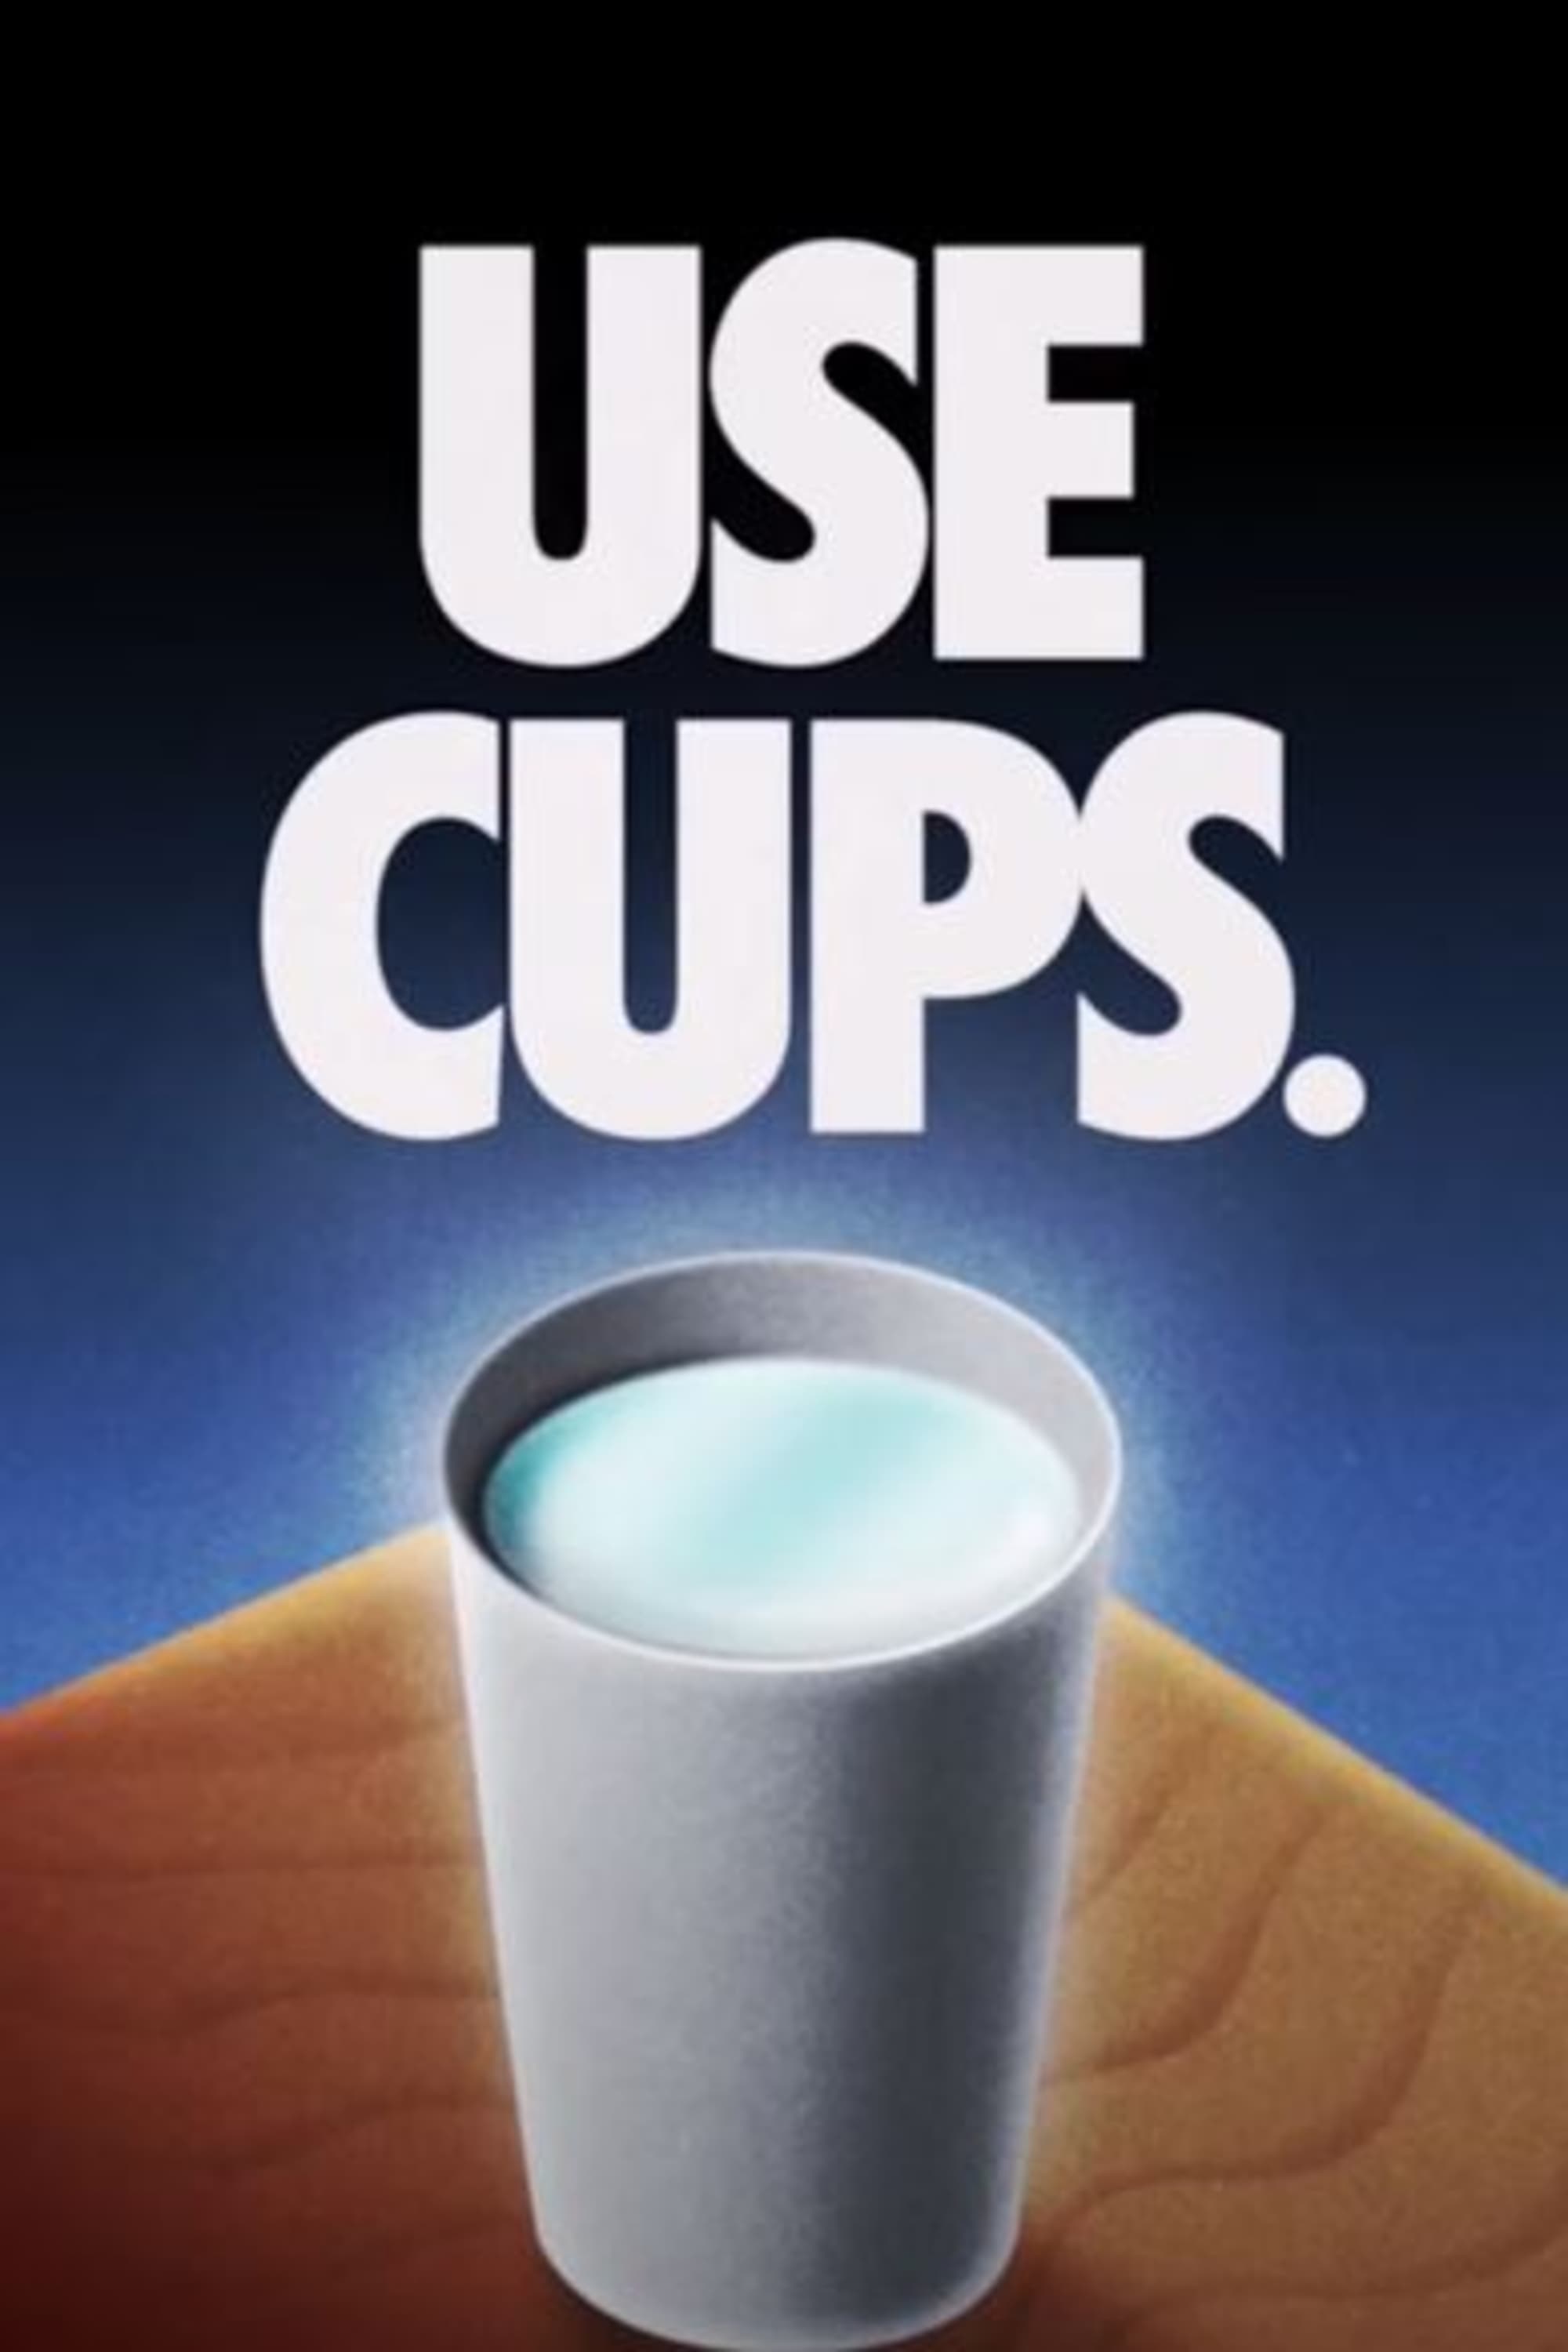 USE CUPS.